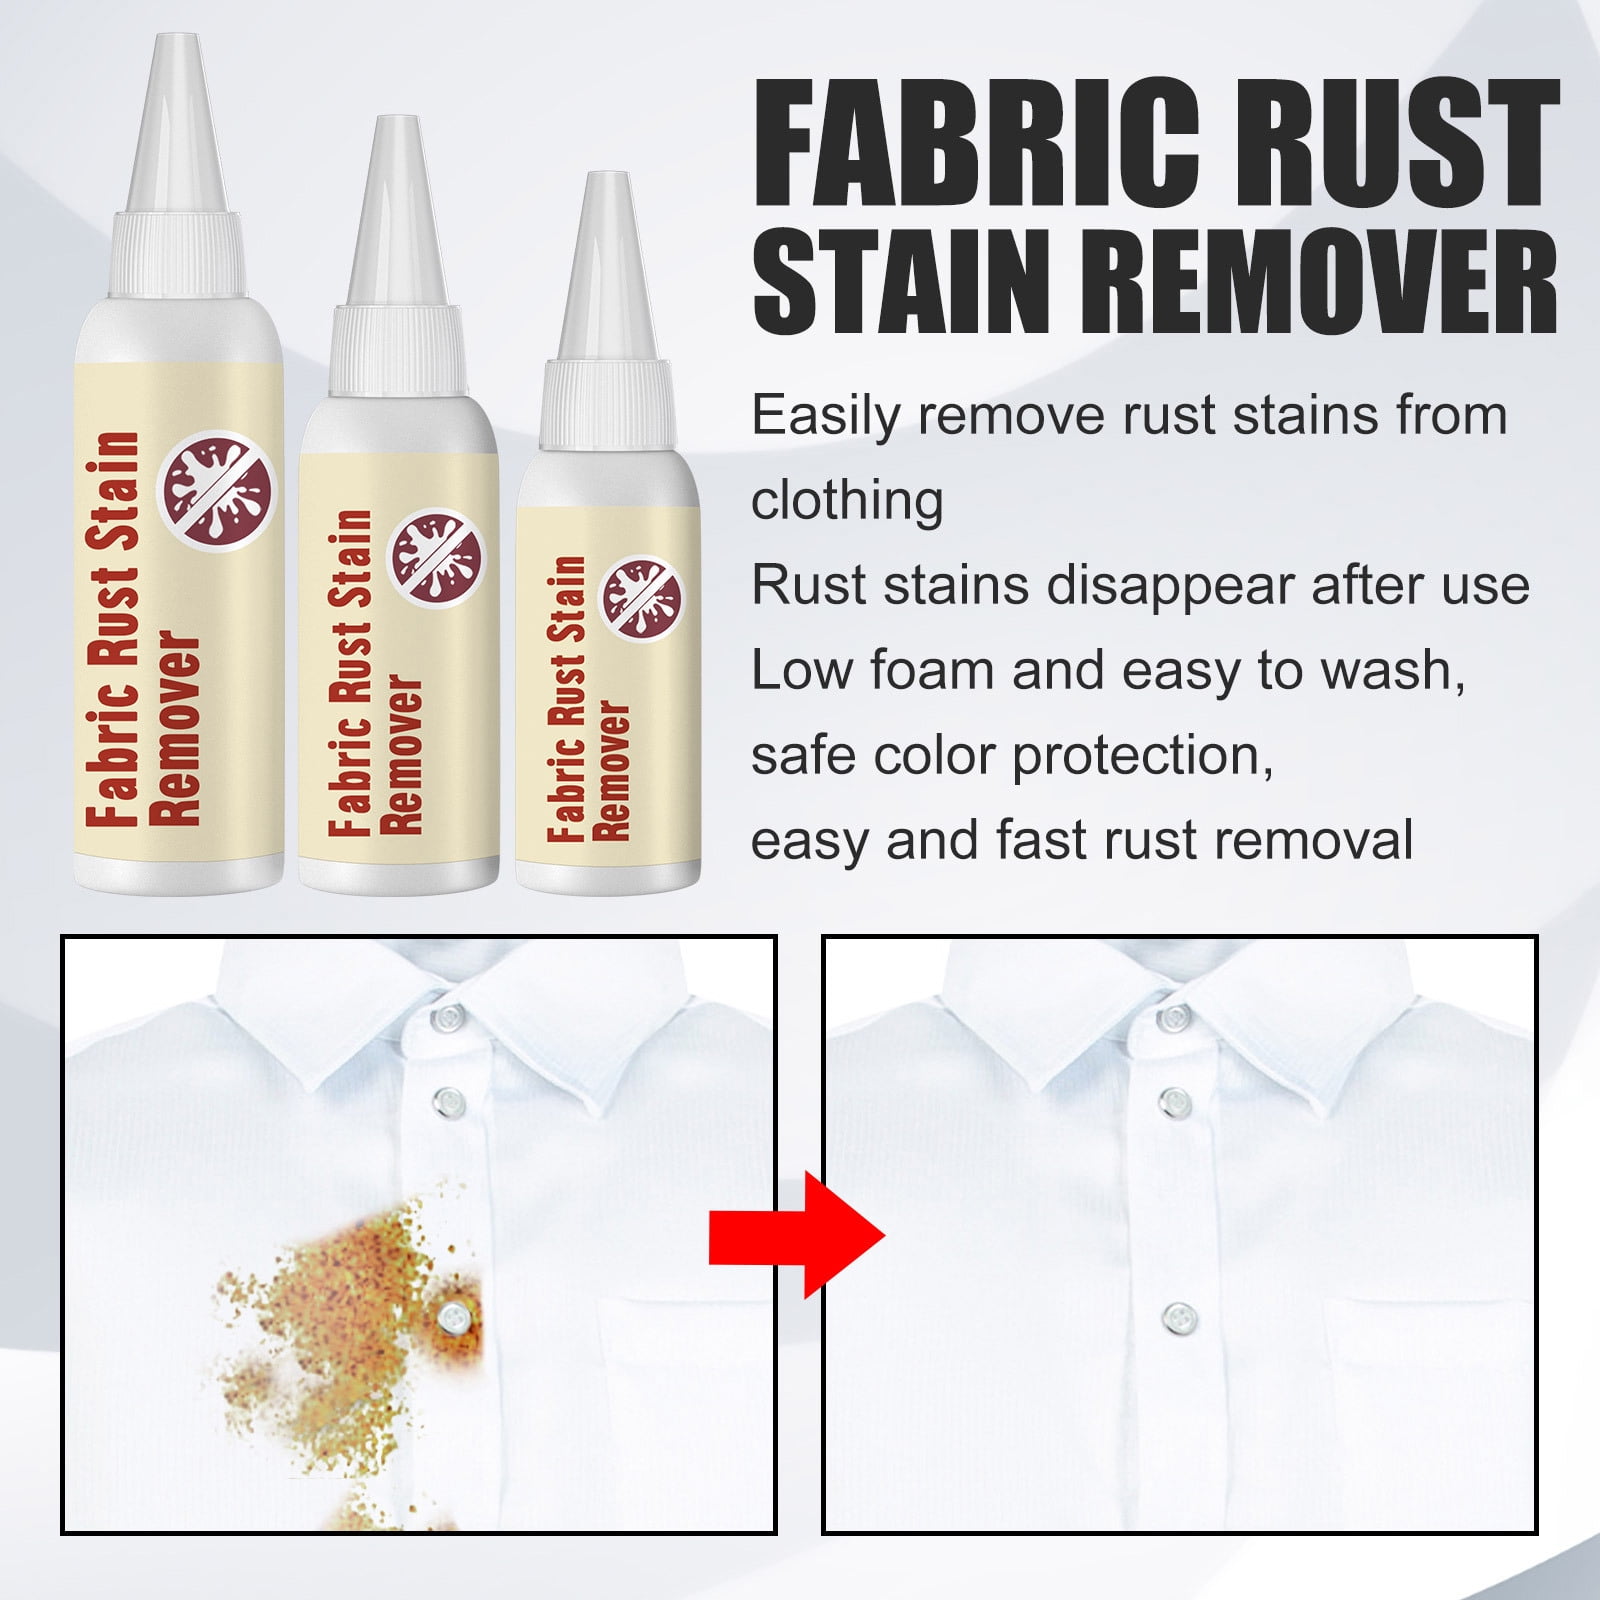 The Ultimate Guide to Removing Every Type of Fabric Stain from Clothing